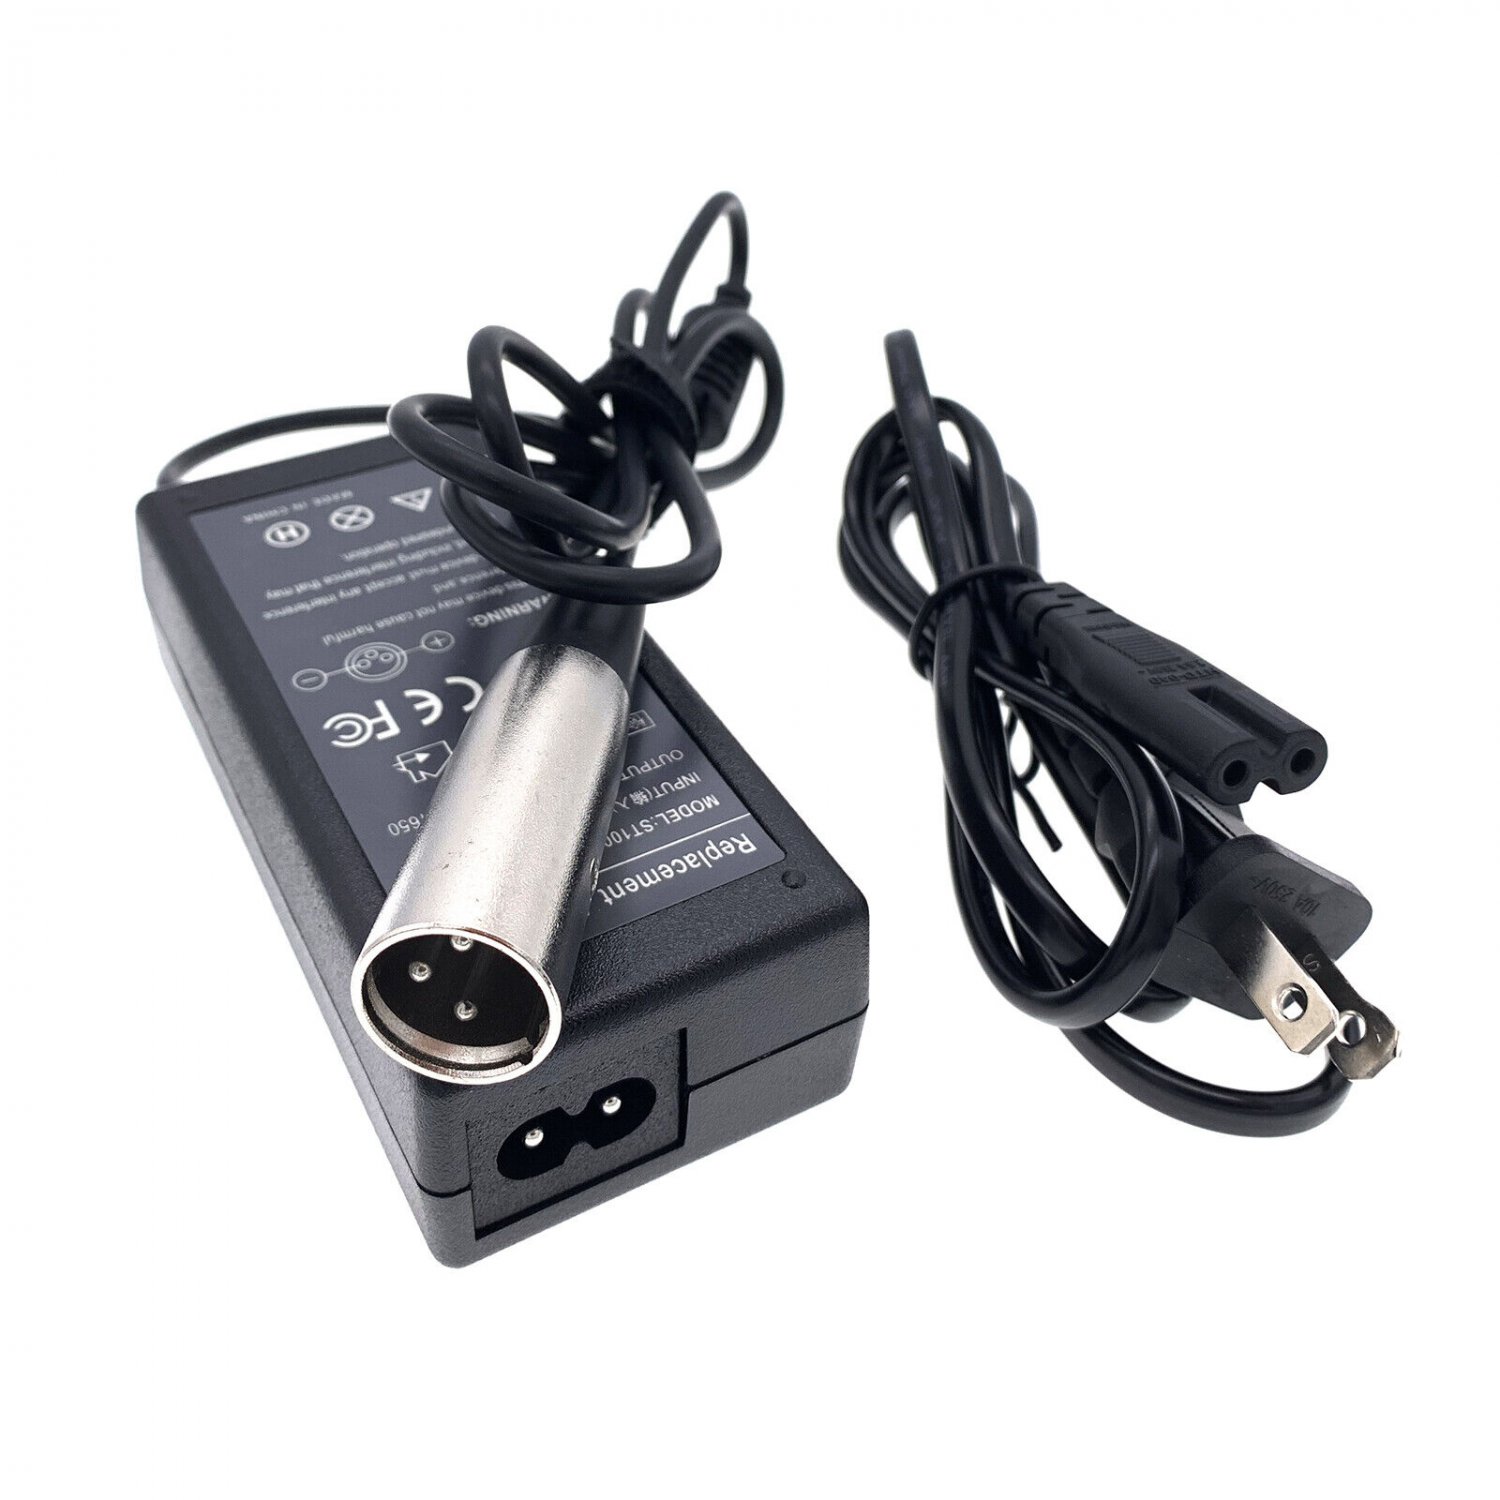 36V 1.8A Battery Charger For Electric Scooter Schwinn S1000 & St1000 S600 S750